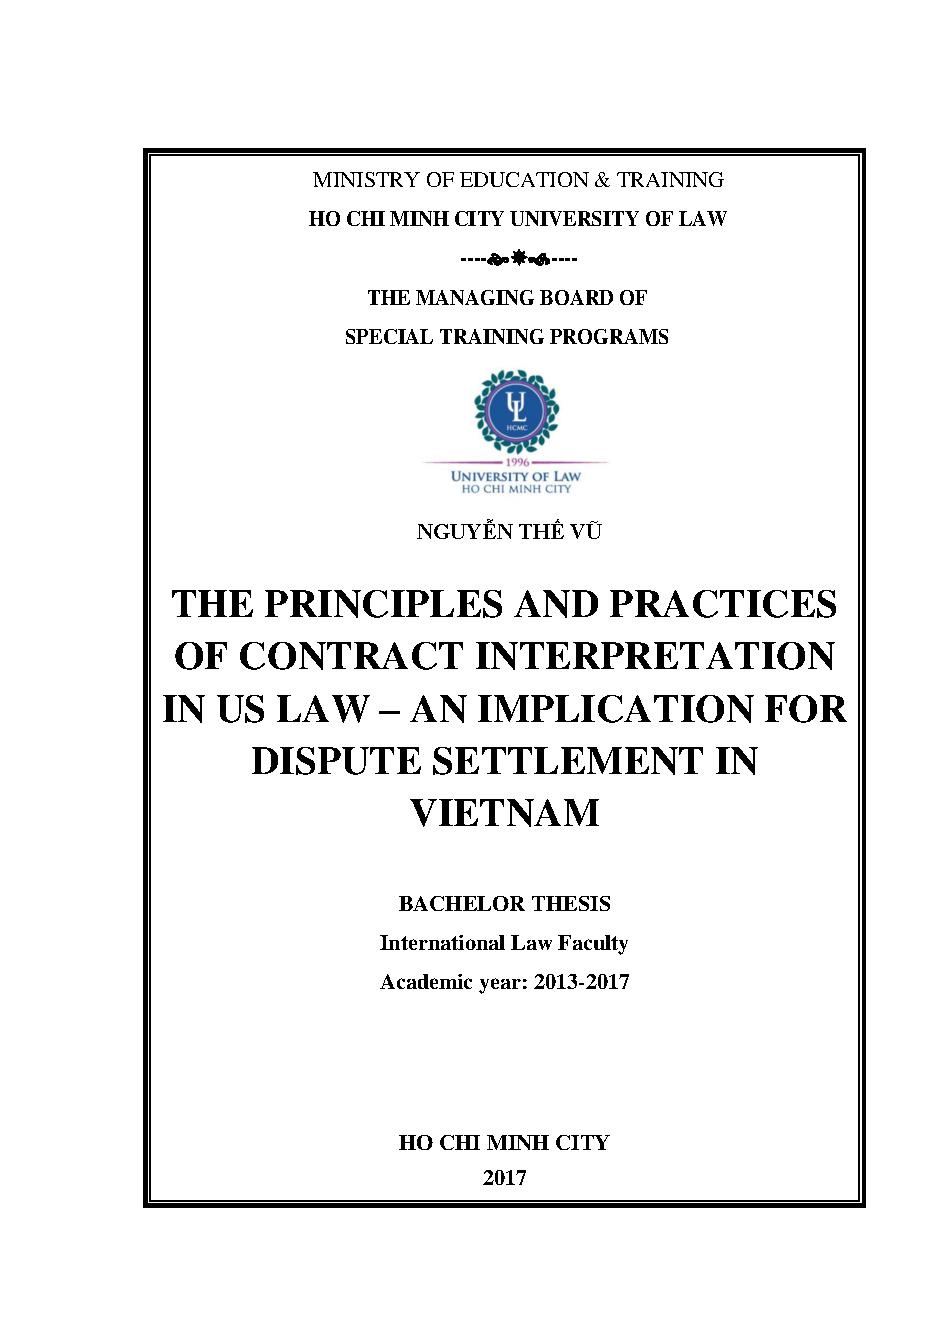 The principles and practices of contract interpretation in US law - An implication for dispute settlement in Vietnam